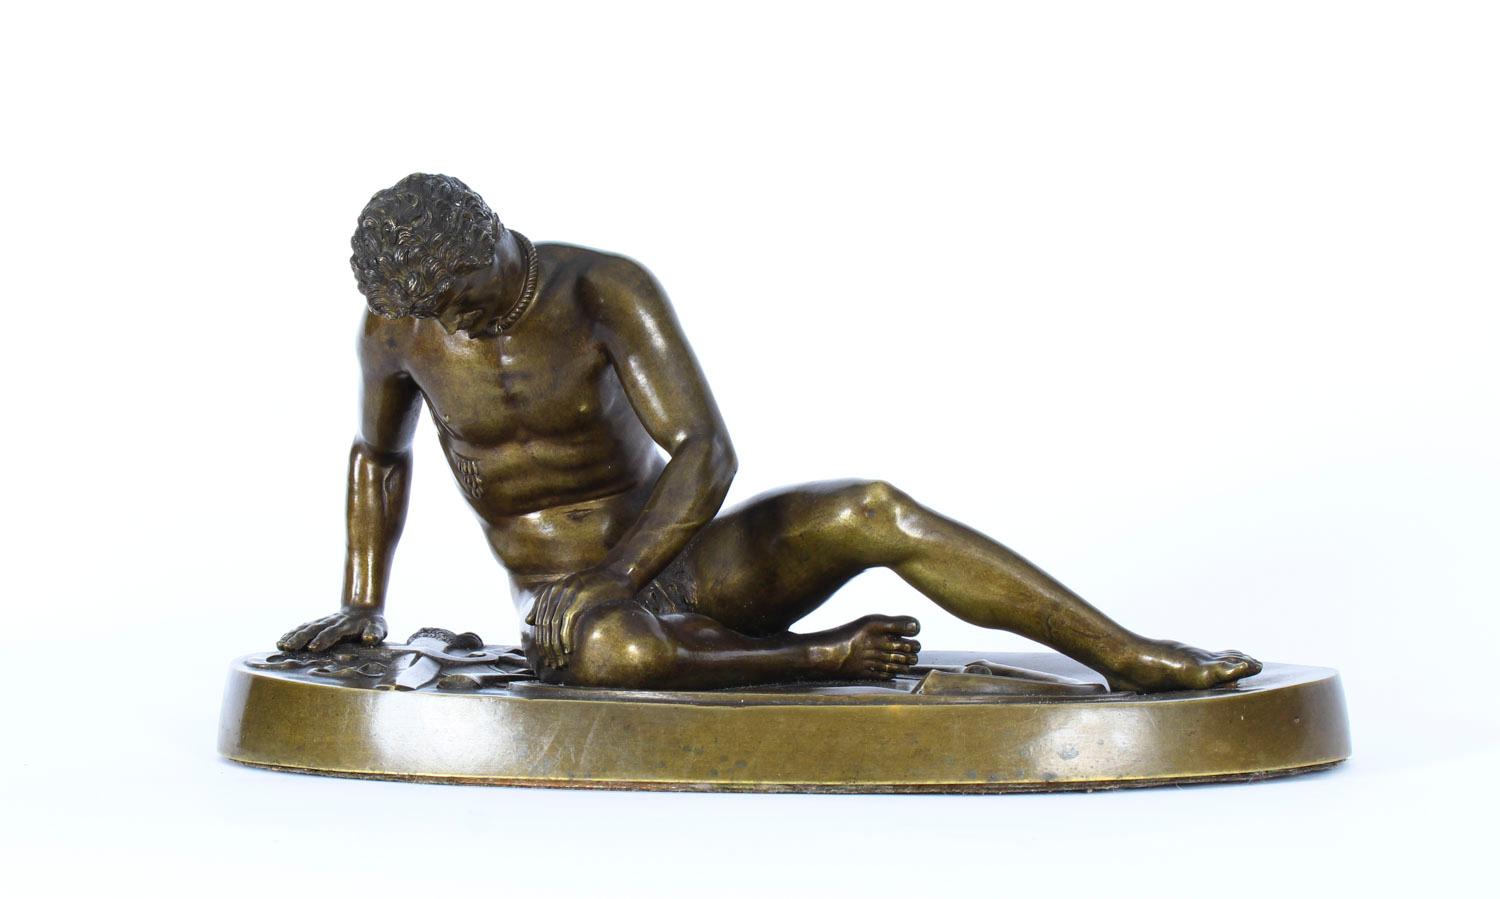 This is a truly magnificent antique Italian Grand Tour figural bronze sculpture depicting a wounded gladiator known as 